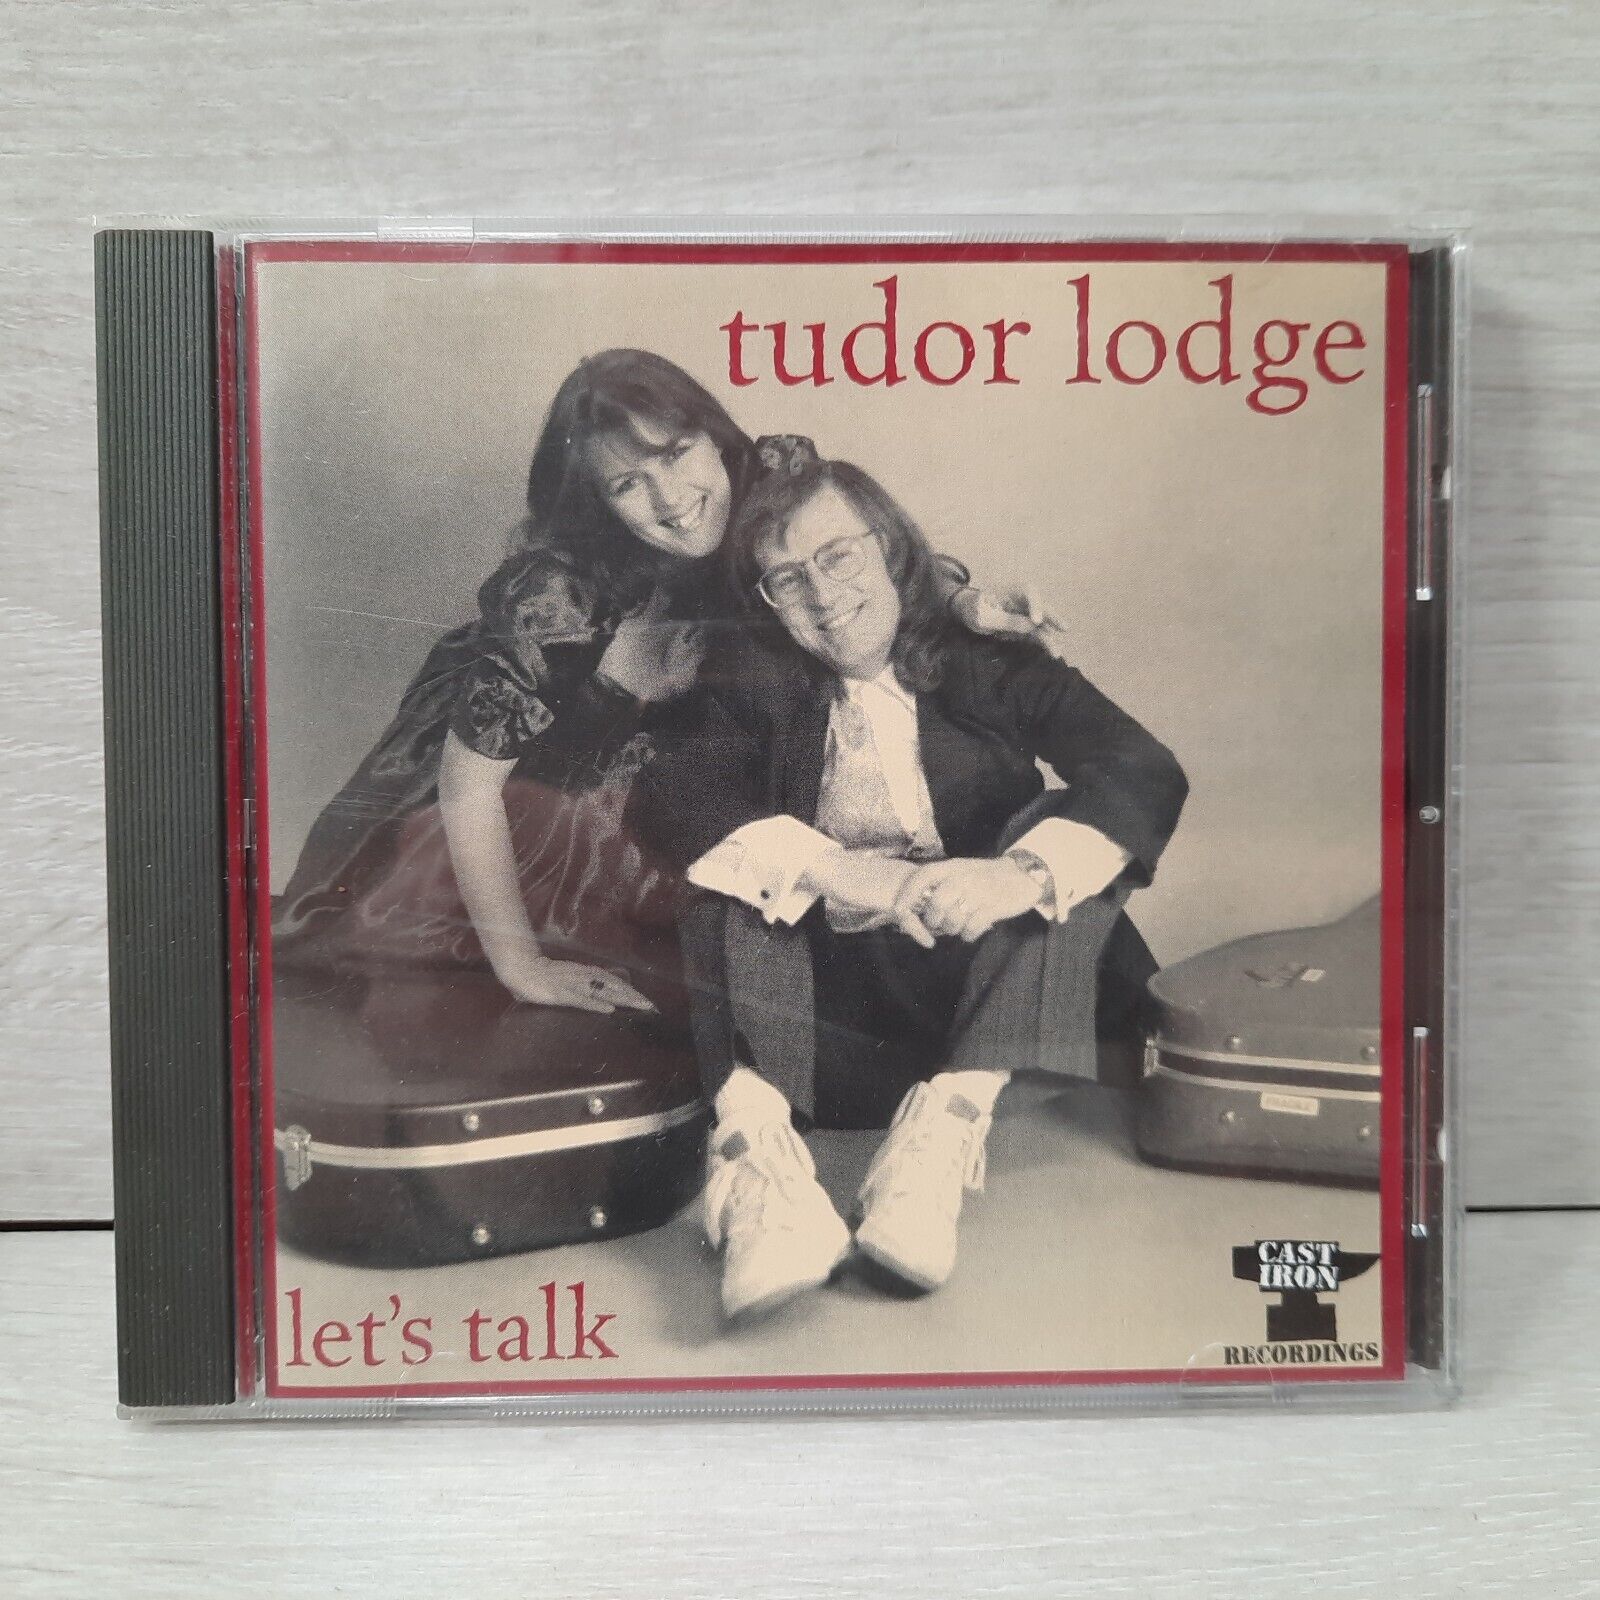 Tudor Lodge - Lets Talk - Cast Iron Recording - 1997 CD - In Very Good Condition